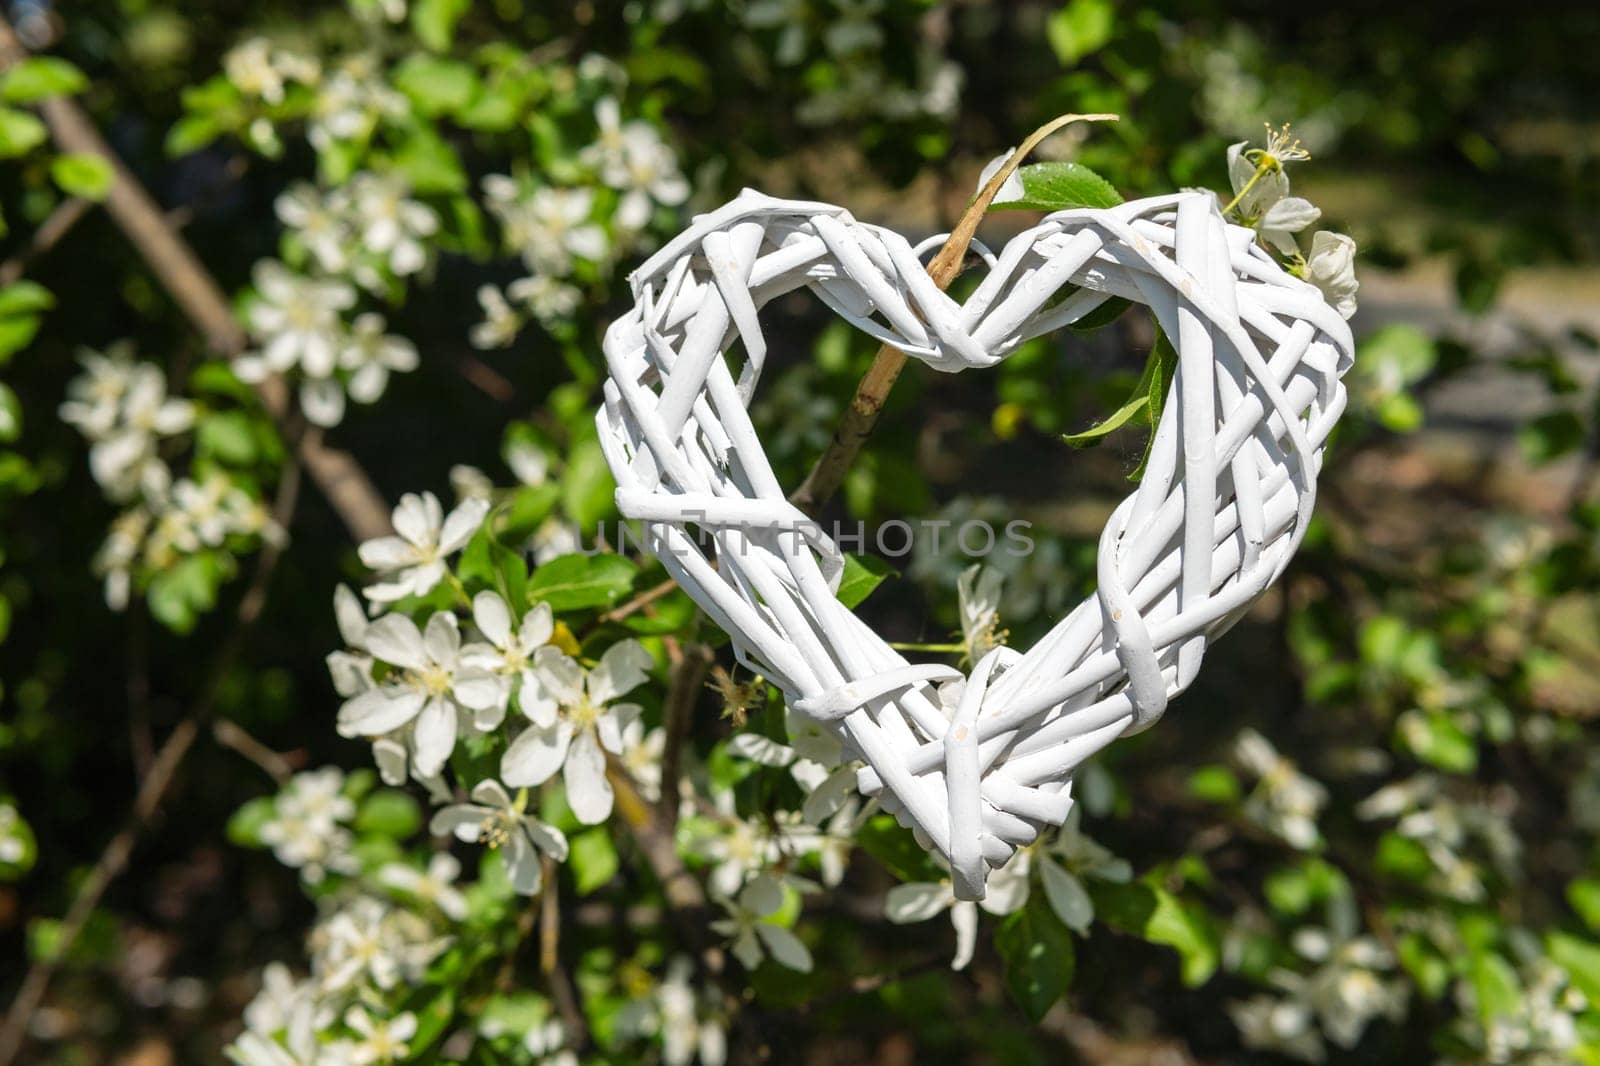 Celebrating Maternal Love Nature's With a Heart Wicker Craft for Mother's Day by darksoul72